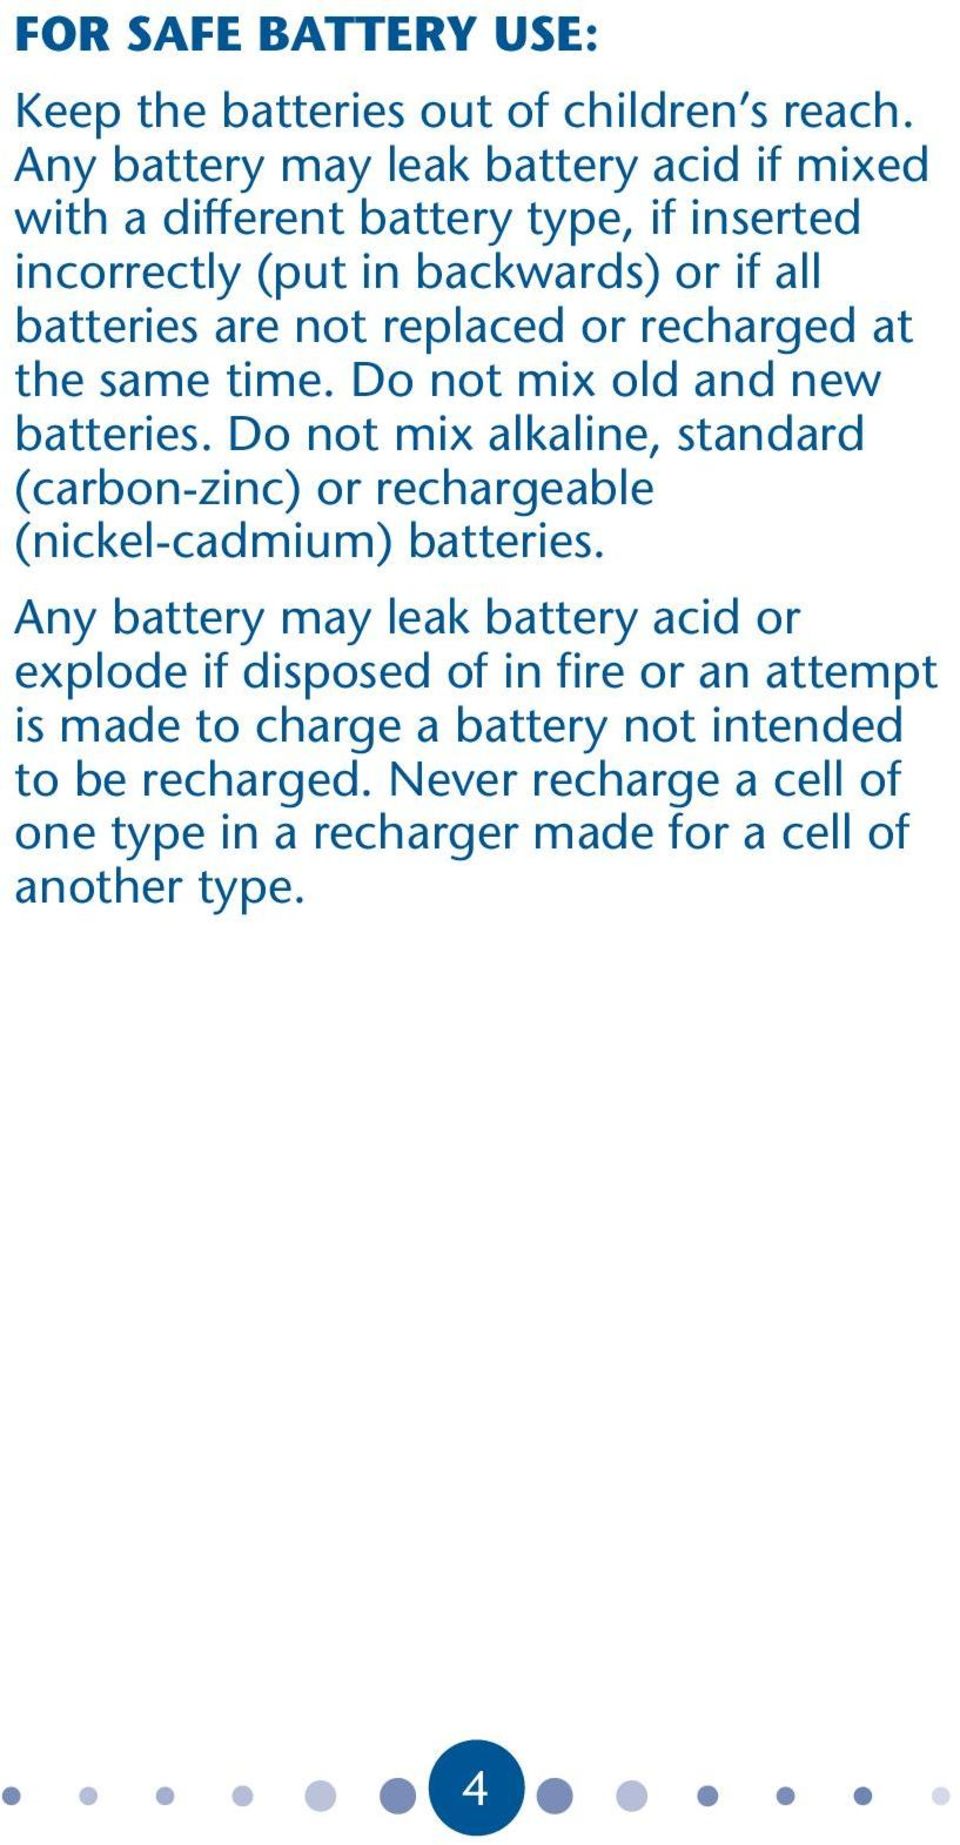 replaced or recharged at the same time. Do not mix old and new batteries.